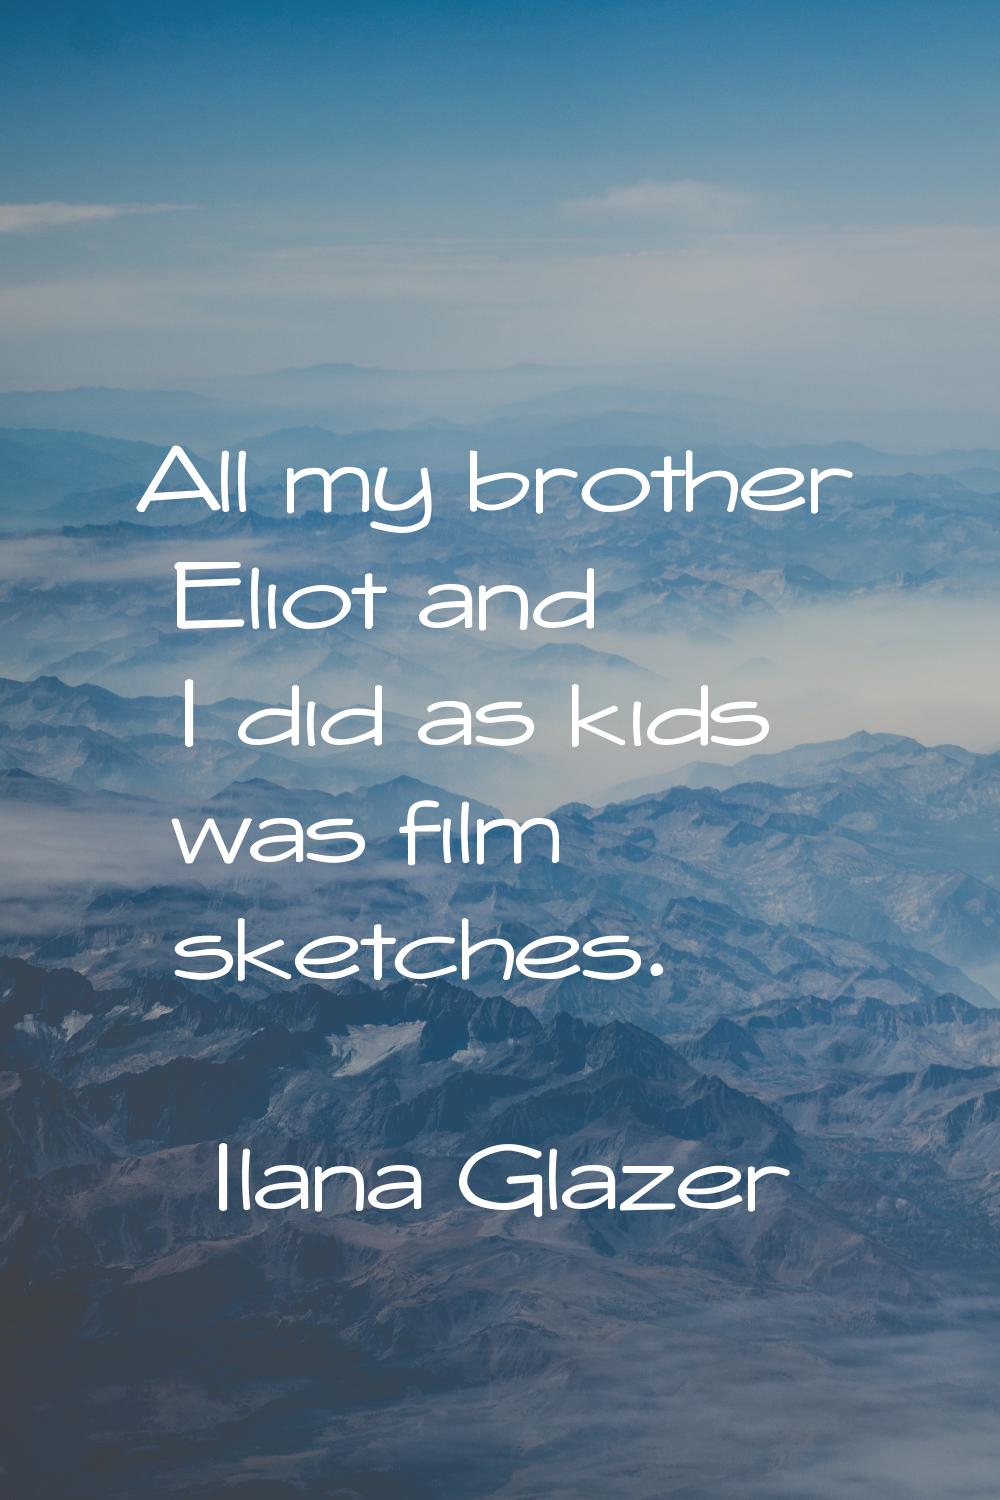 All my brother Eliot and I did as kids was film sketches.